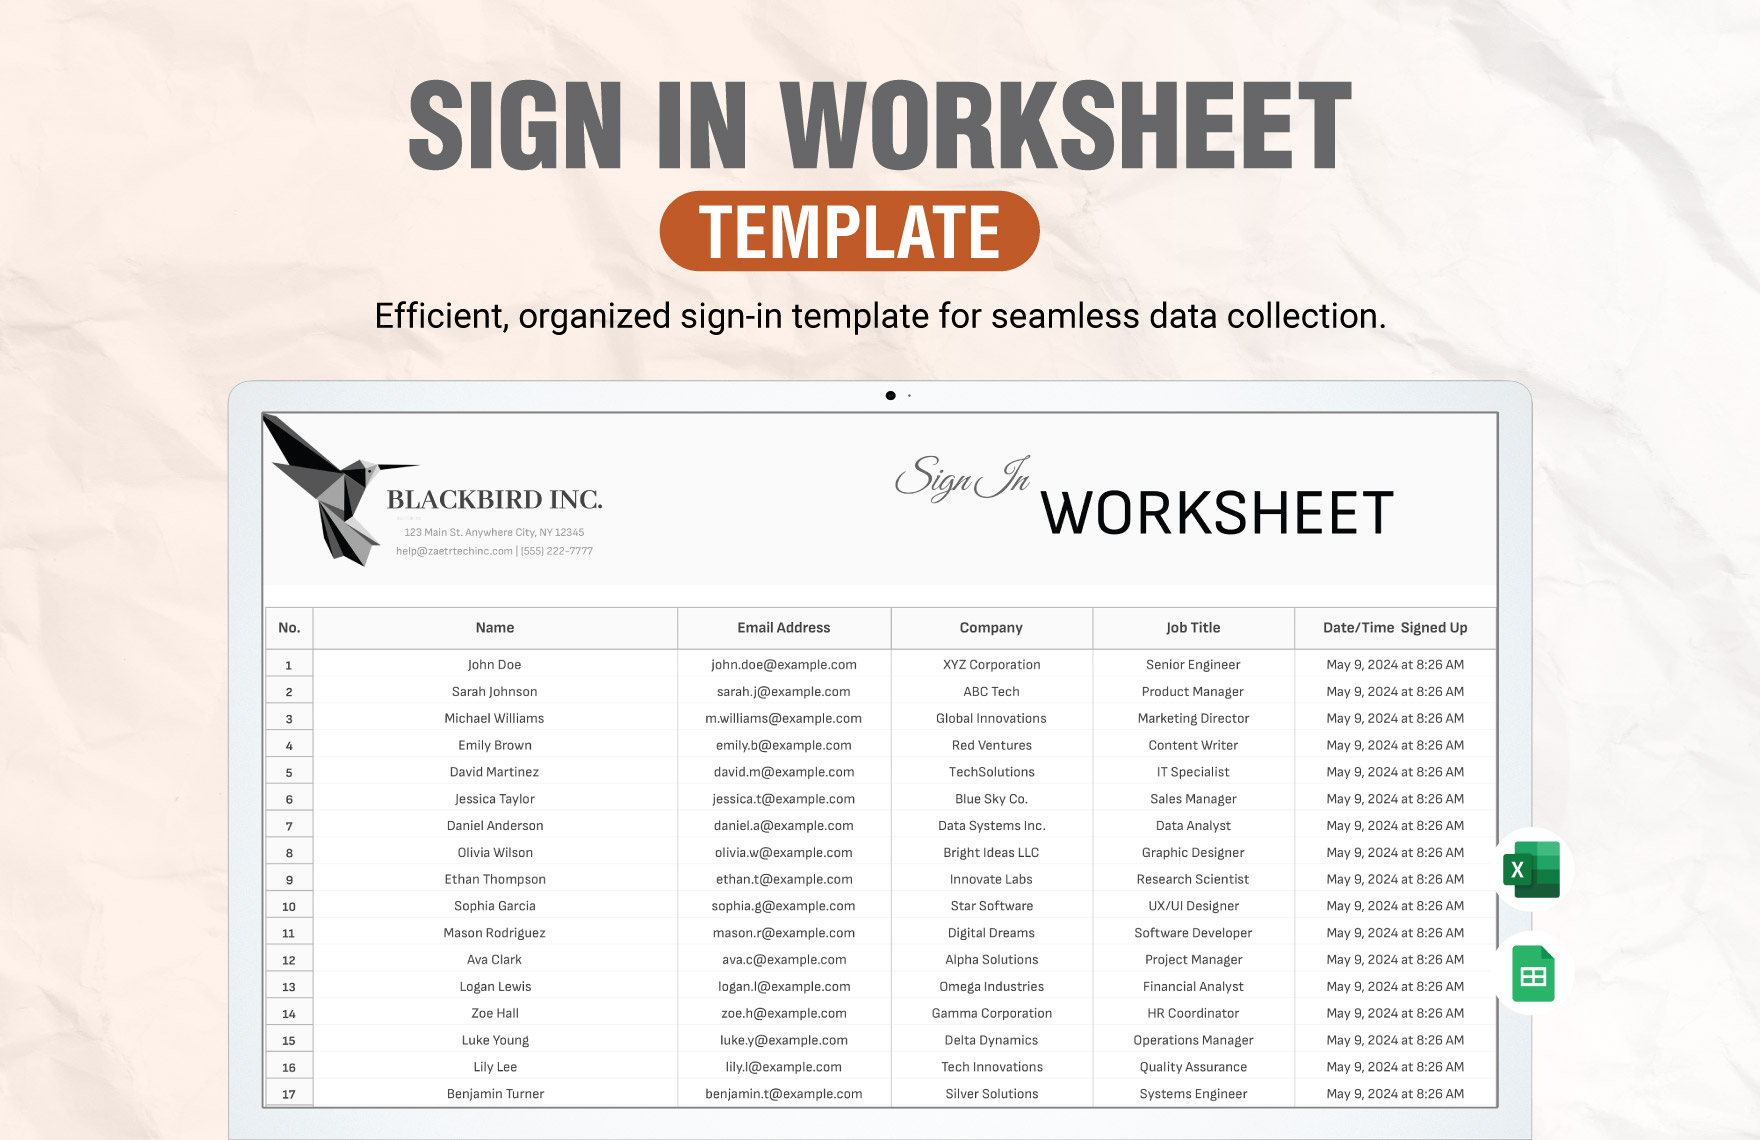 Free Sign in Worksheet Template